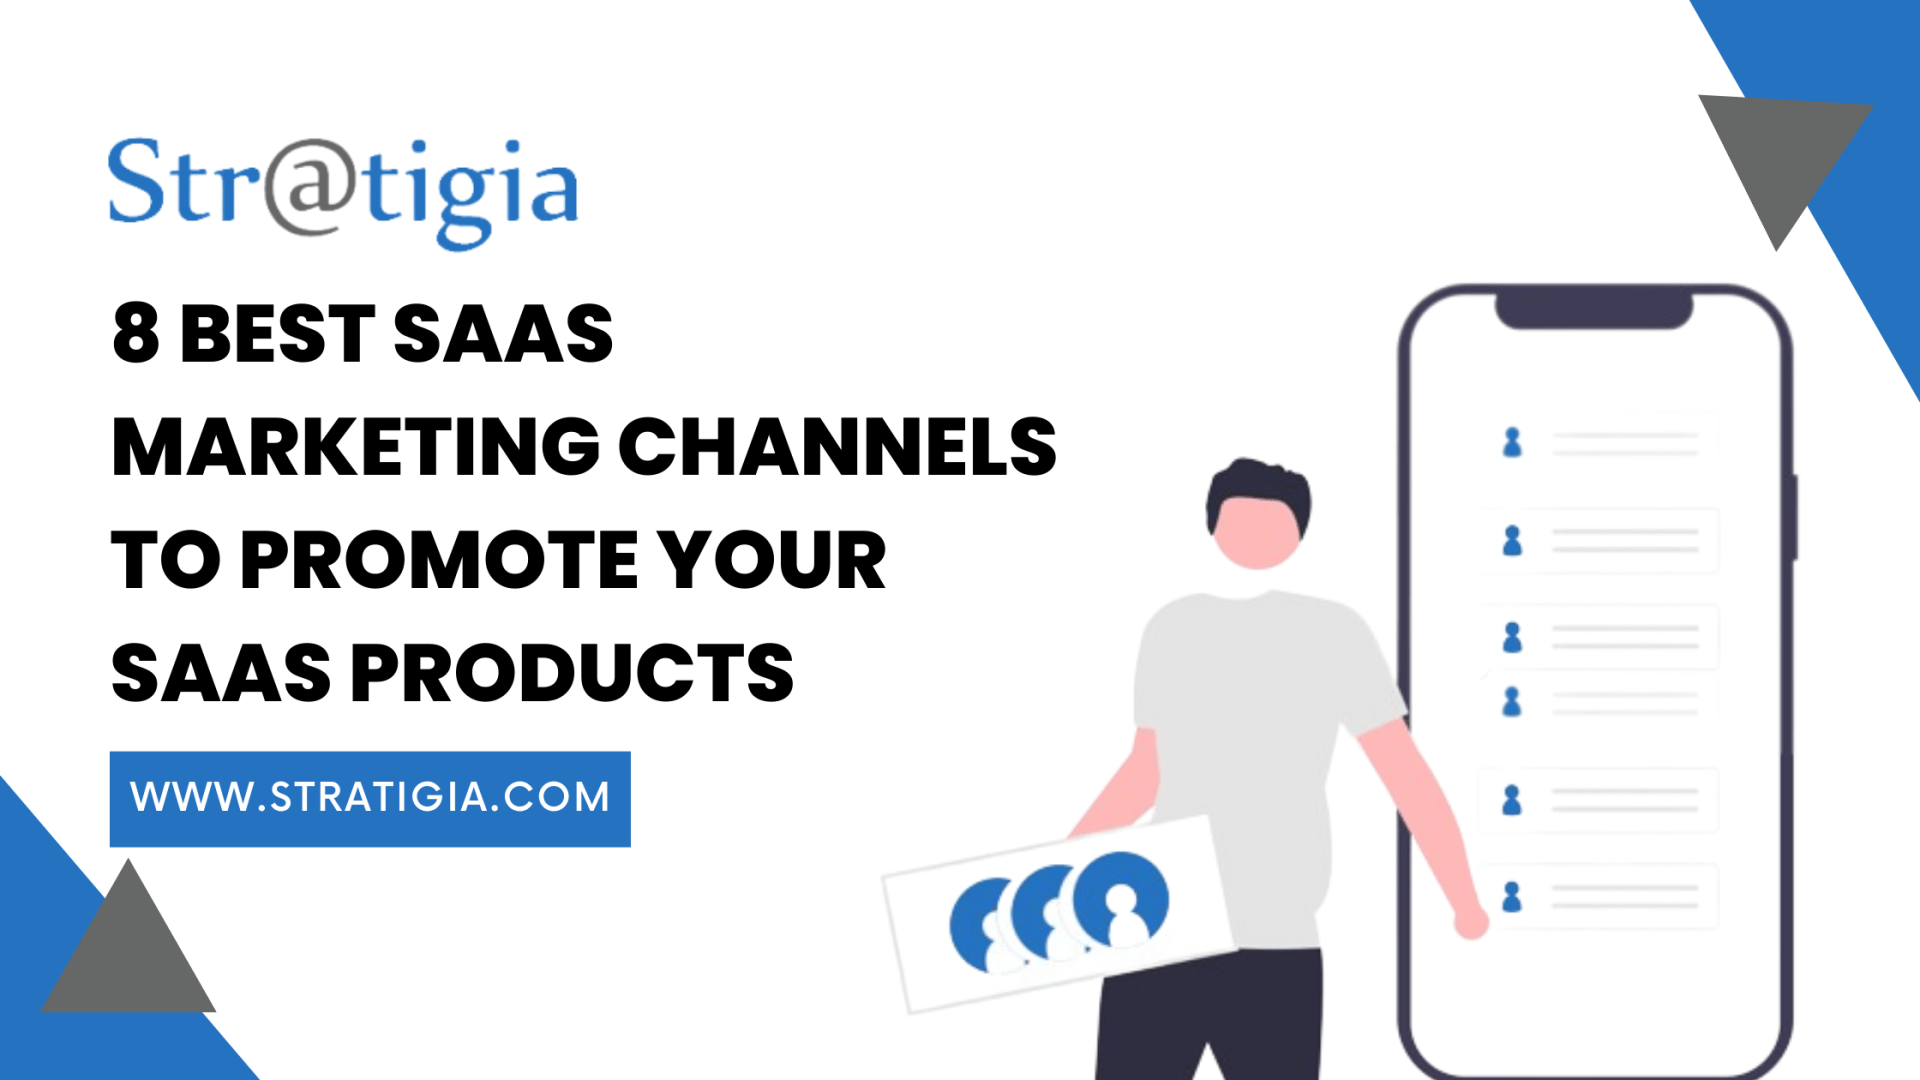 8-Best-SaaS-Marketing-Channels-To-Promote-Your-SaaS-Products